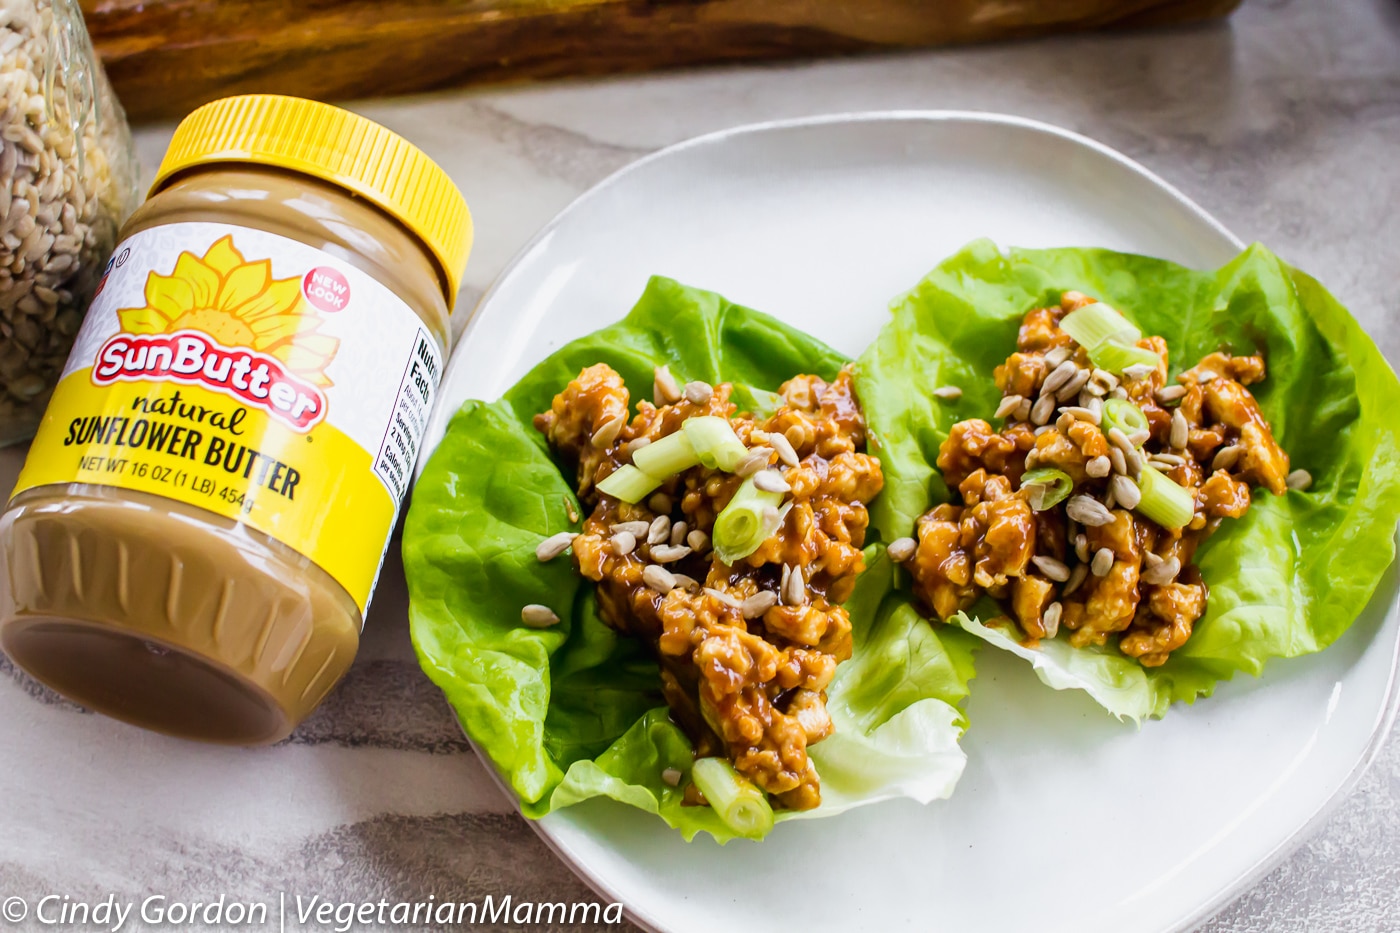 Two Thai Lettuce wraps on a plate next to a jar of SunButter